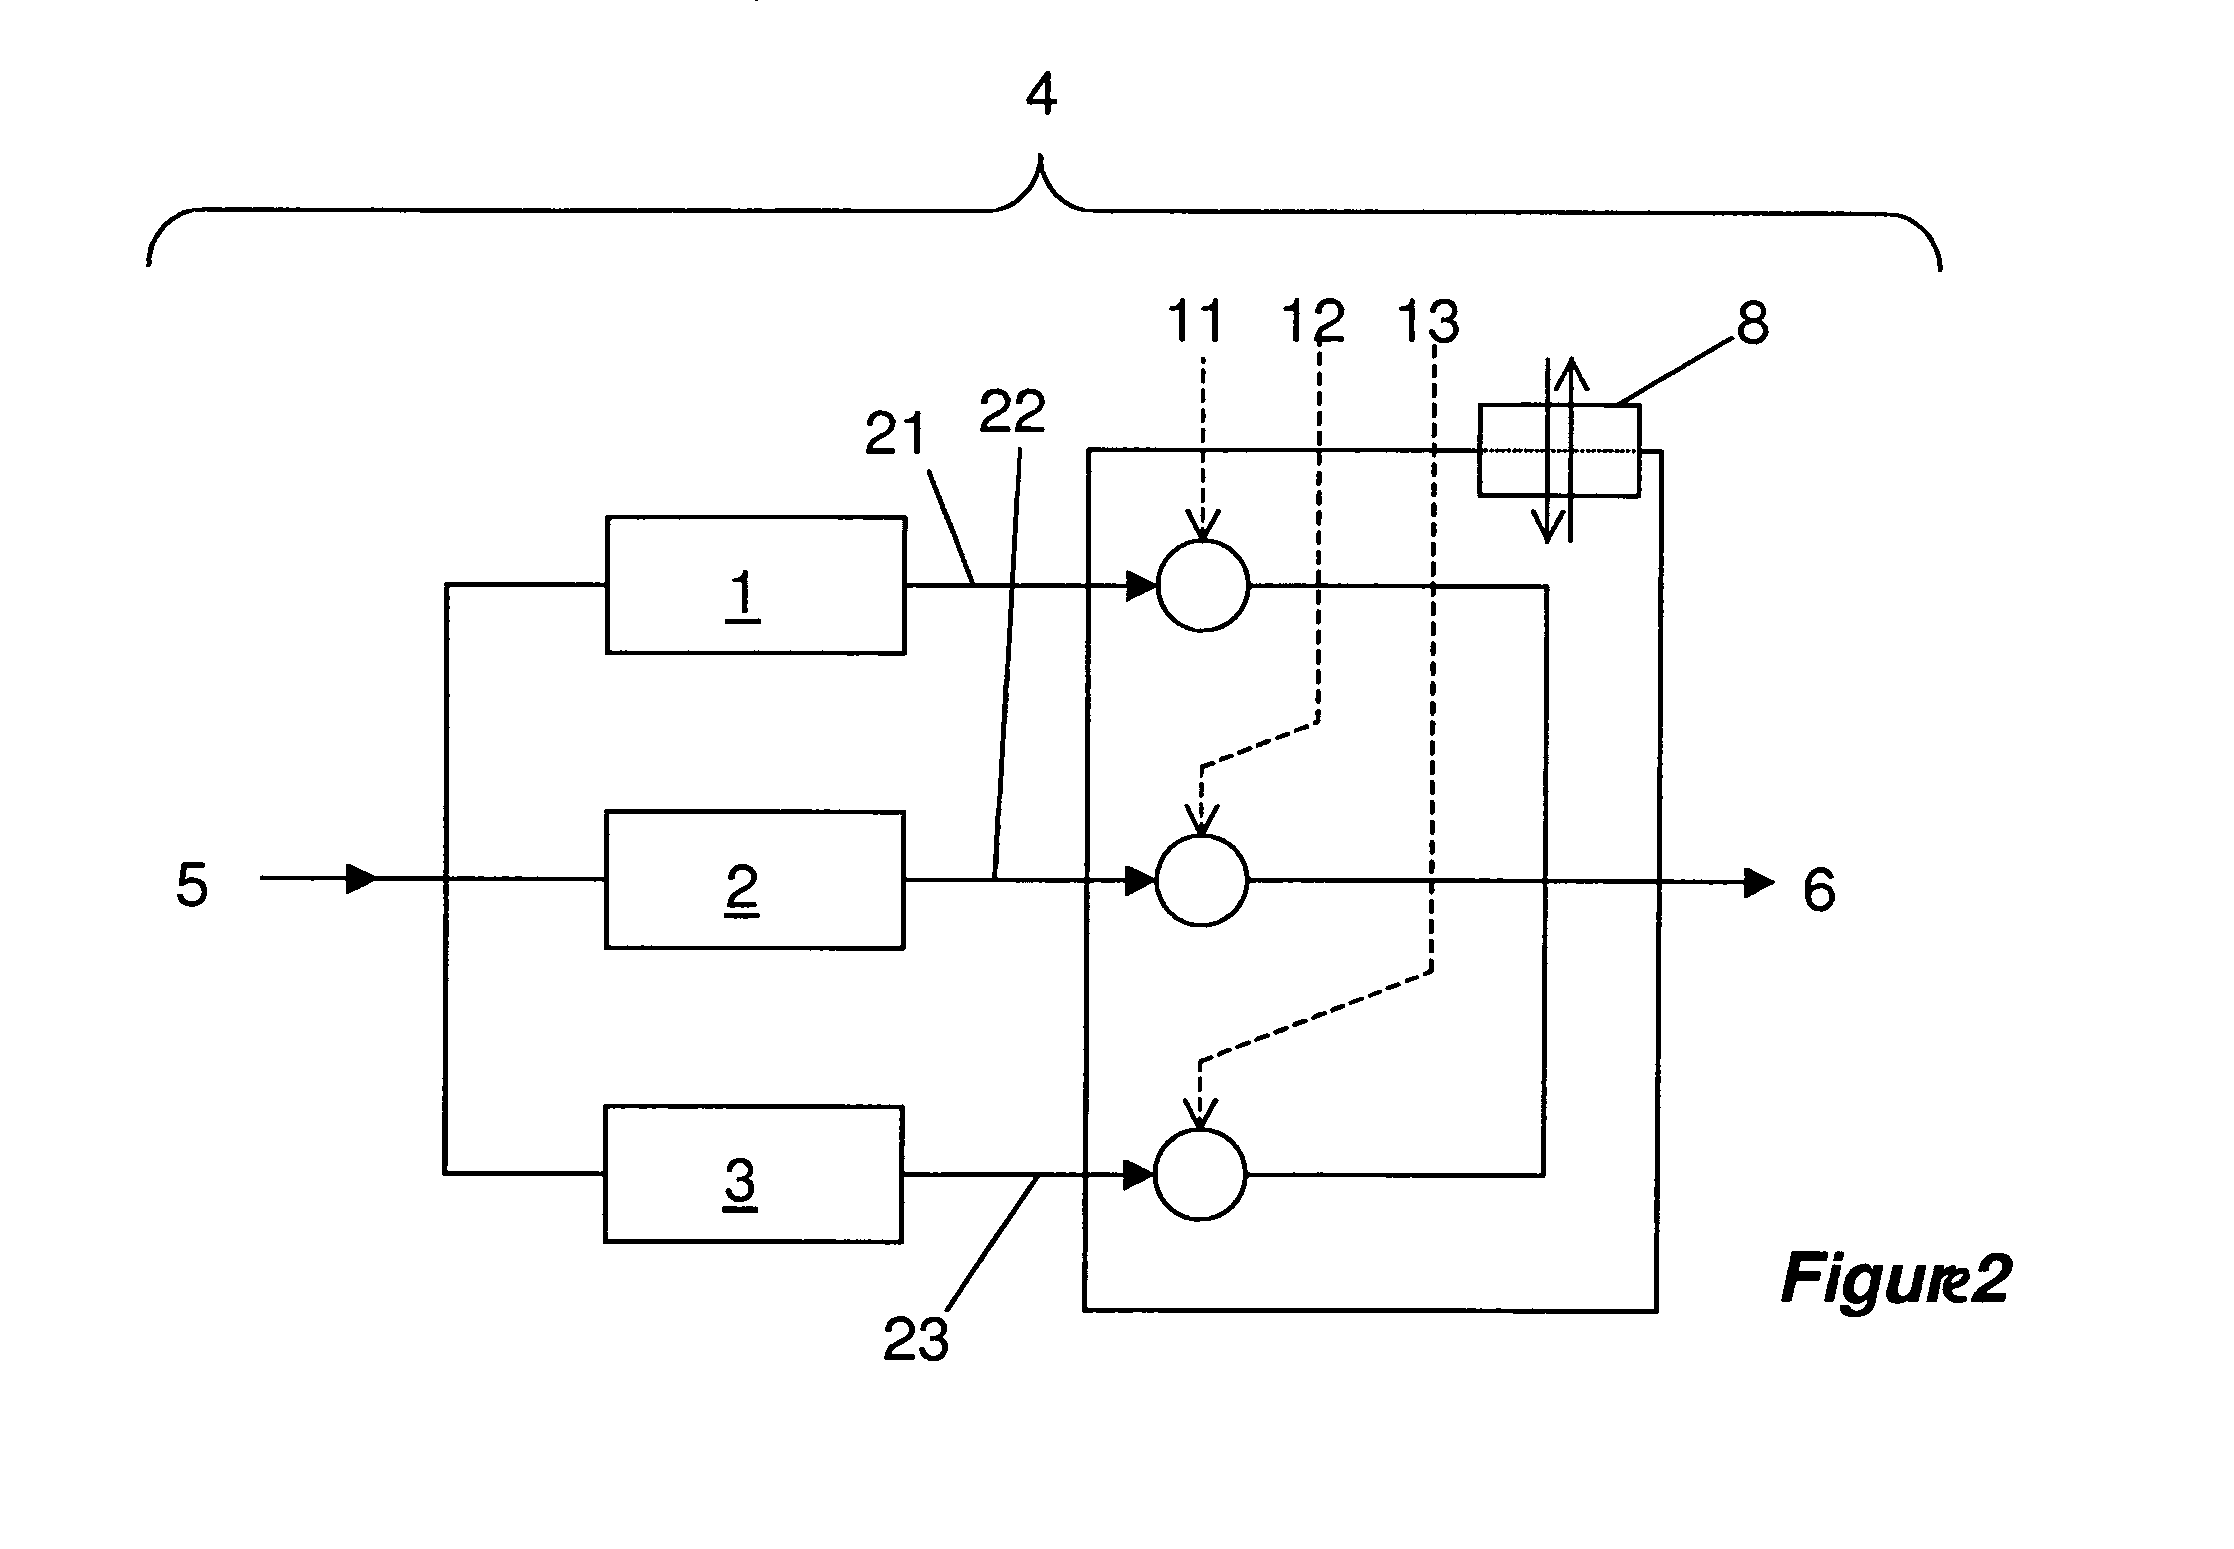 Evaluation circuit for processing digital signals, method, and sensor assembly